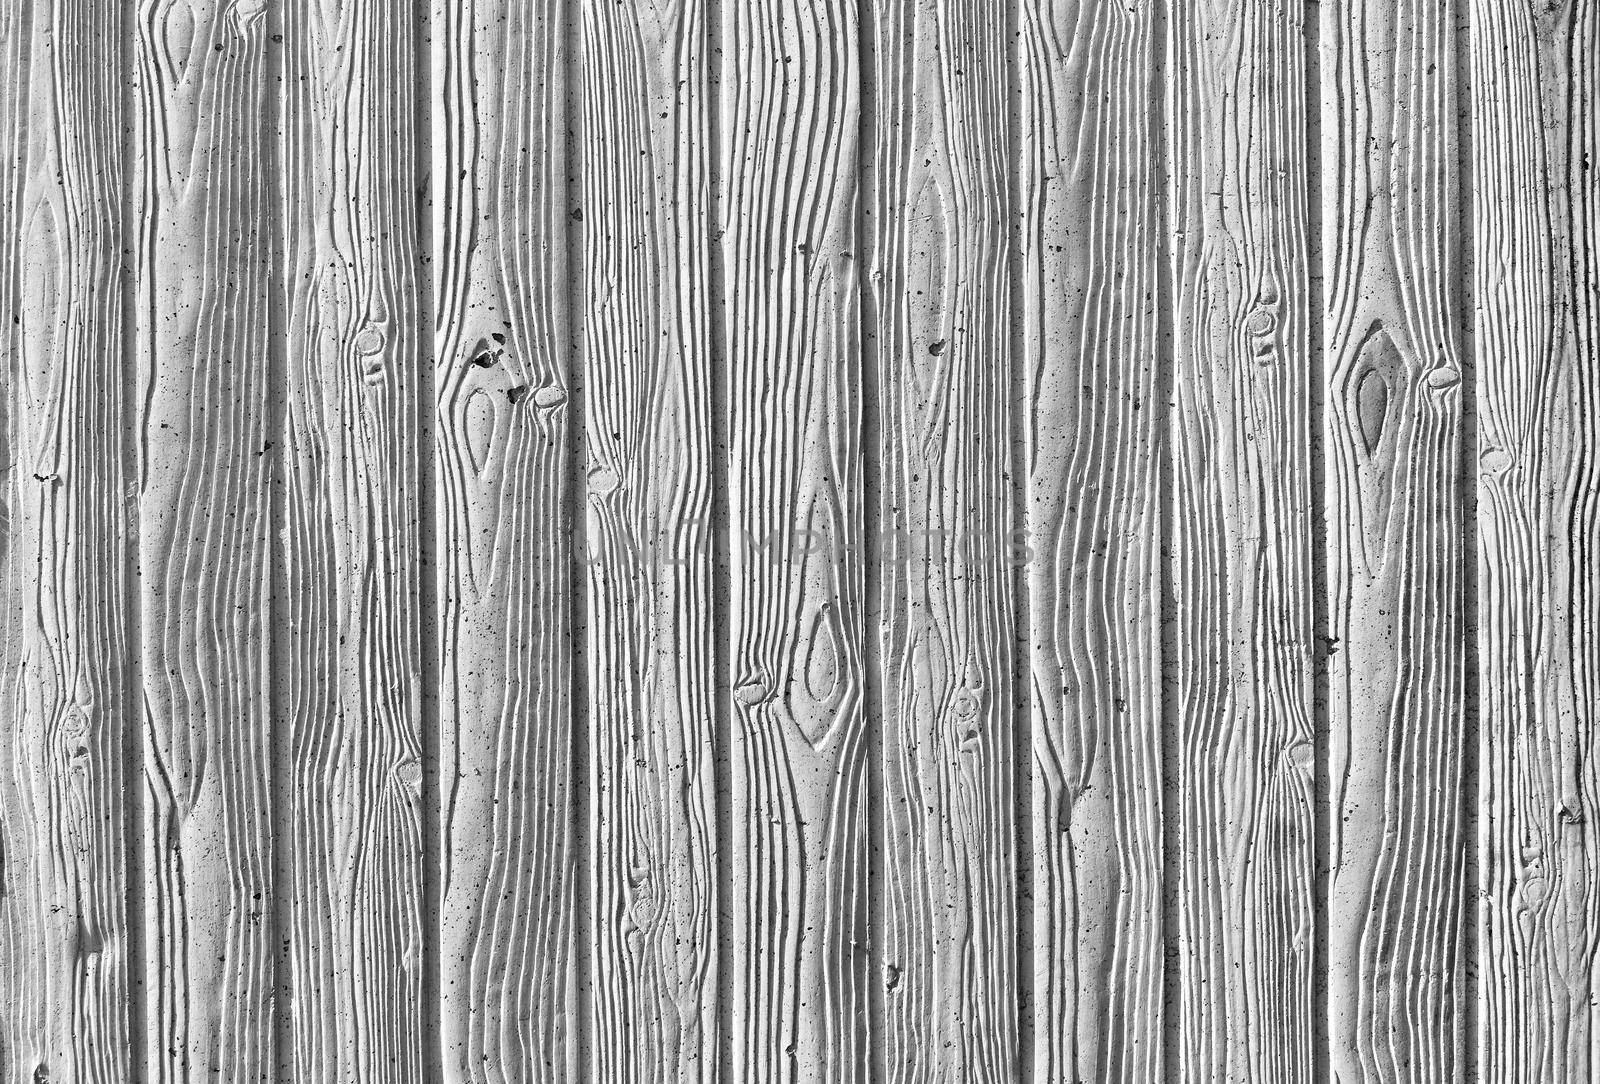 Imprint of wood texture in cast concrete by Mibuch